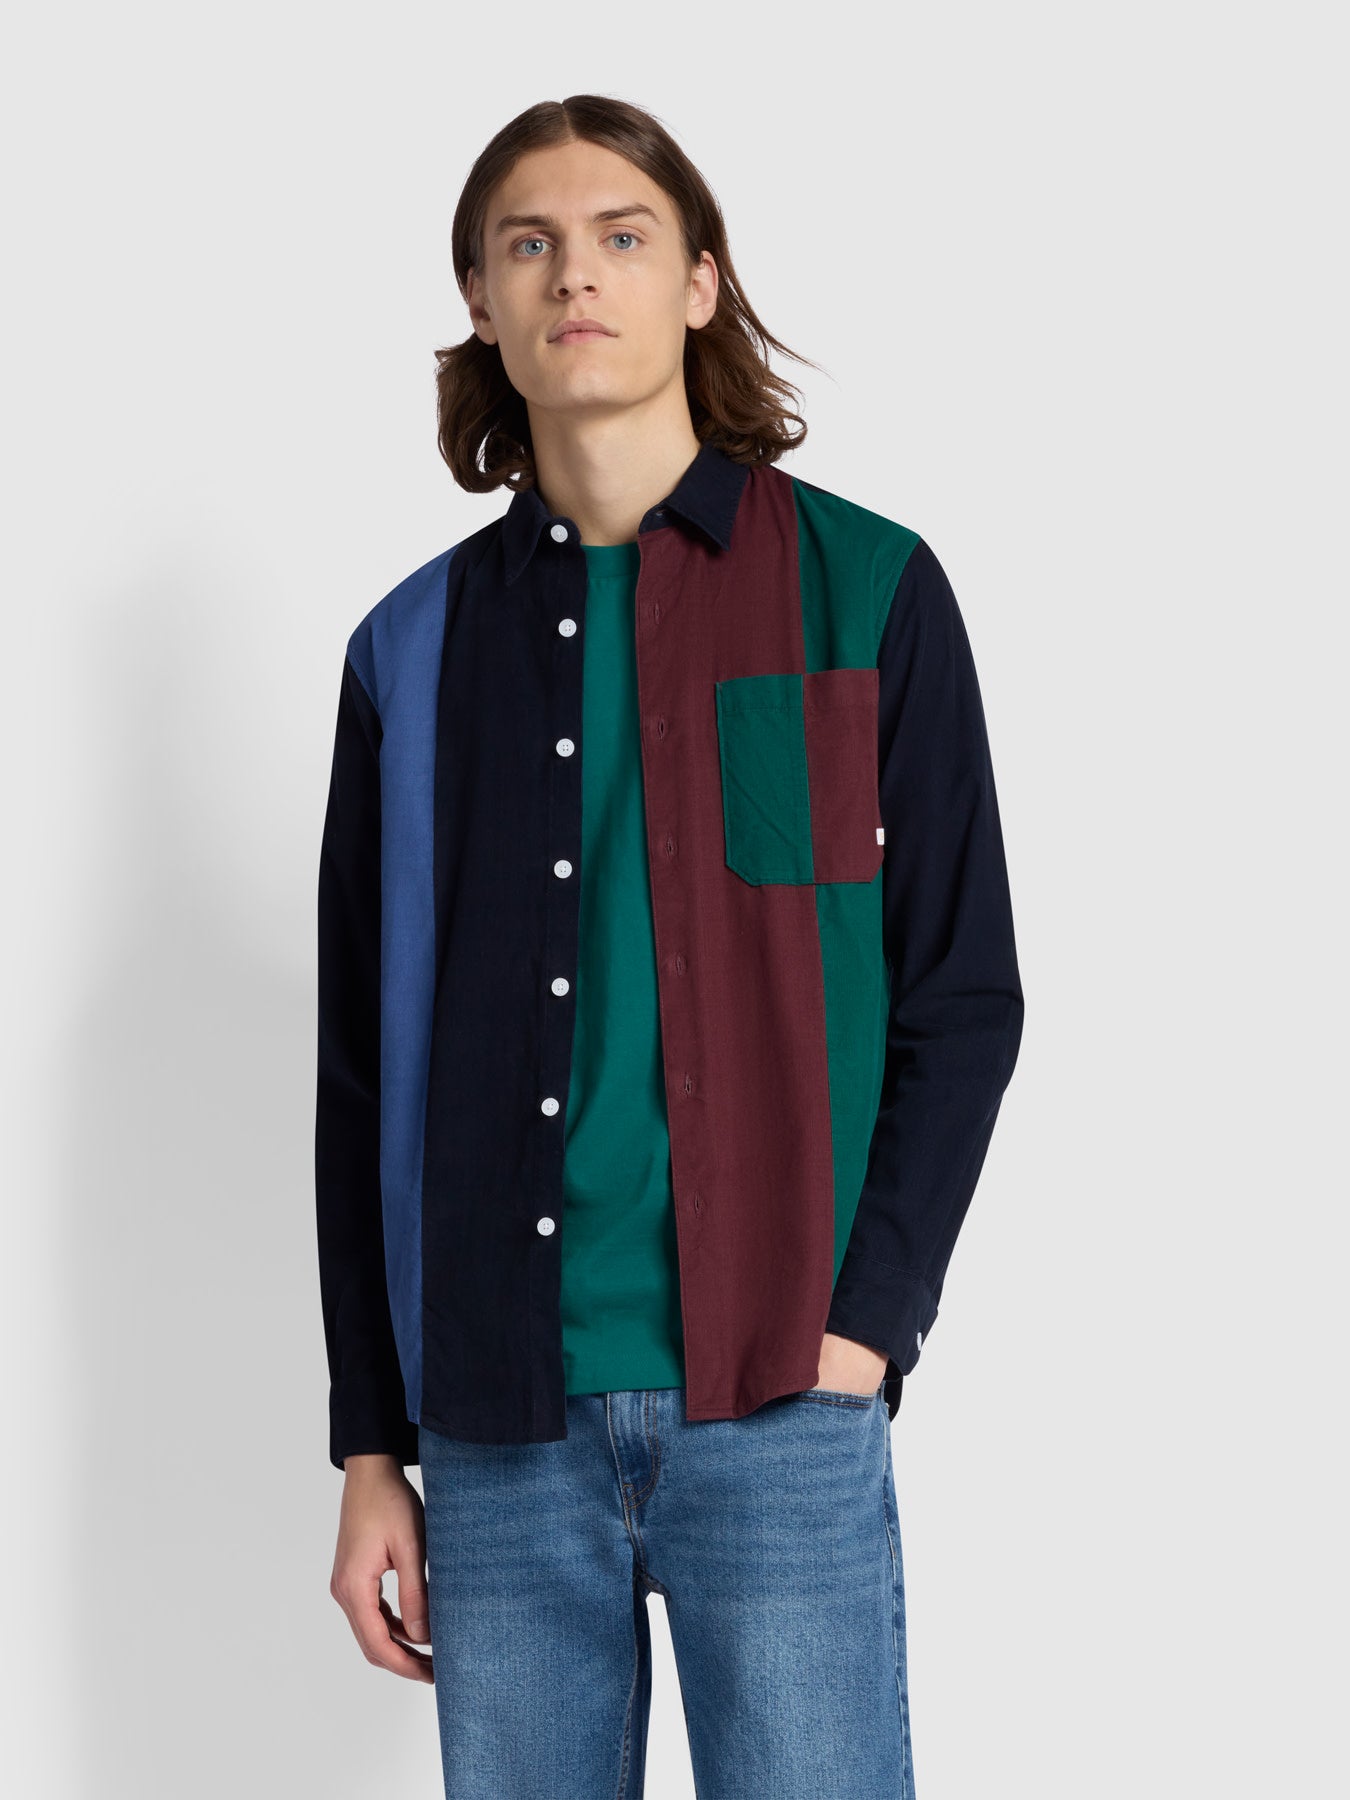 View Panino Casual Fit Long Sleeve Corduroy Patchwork Shirt In True Navy information